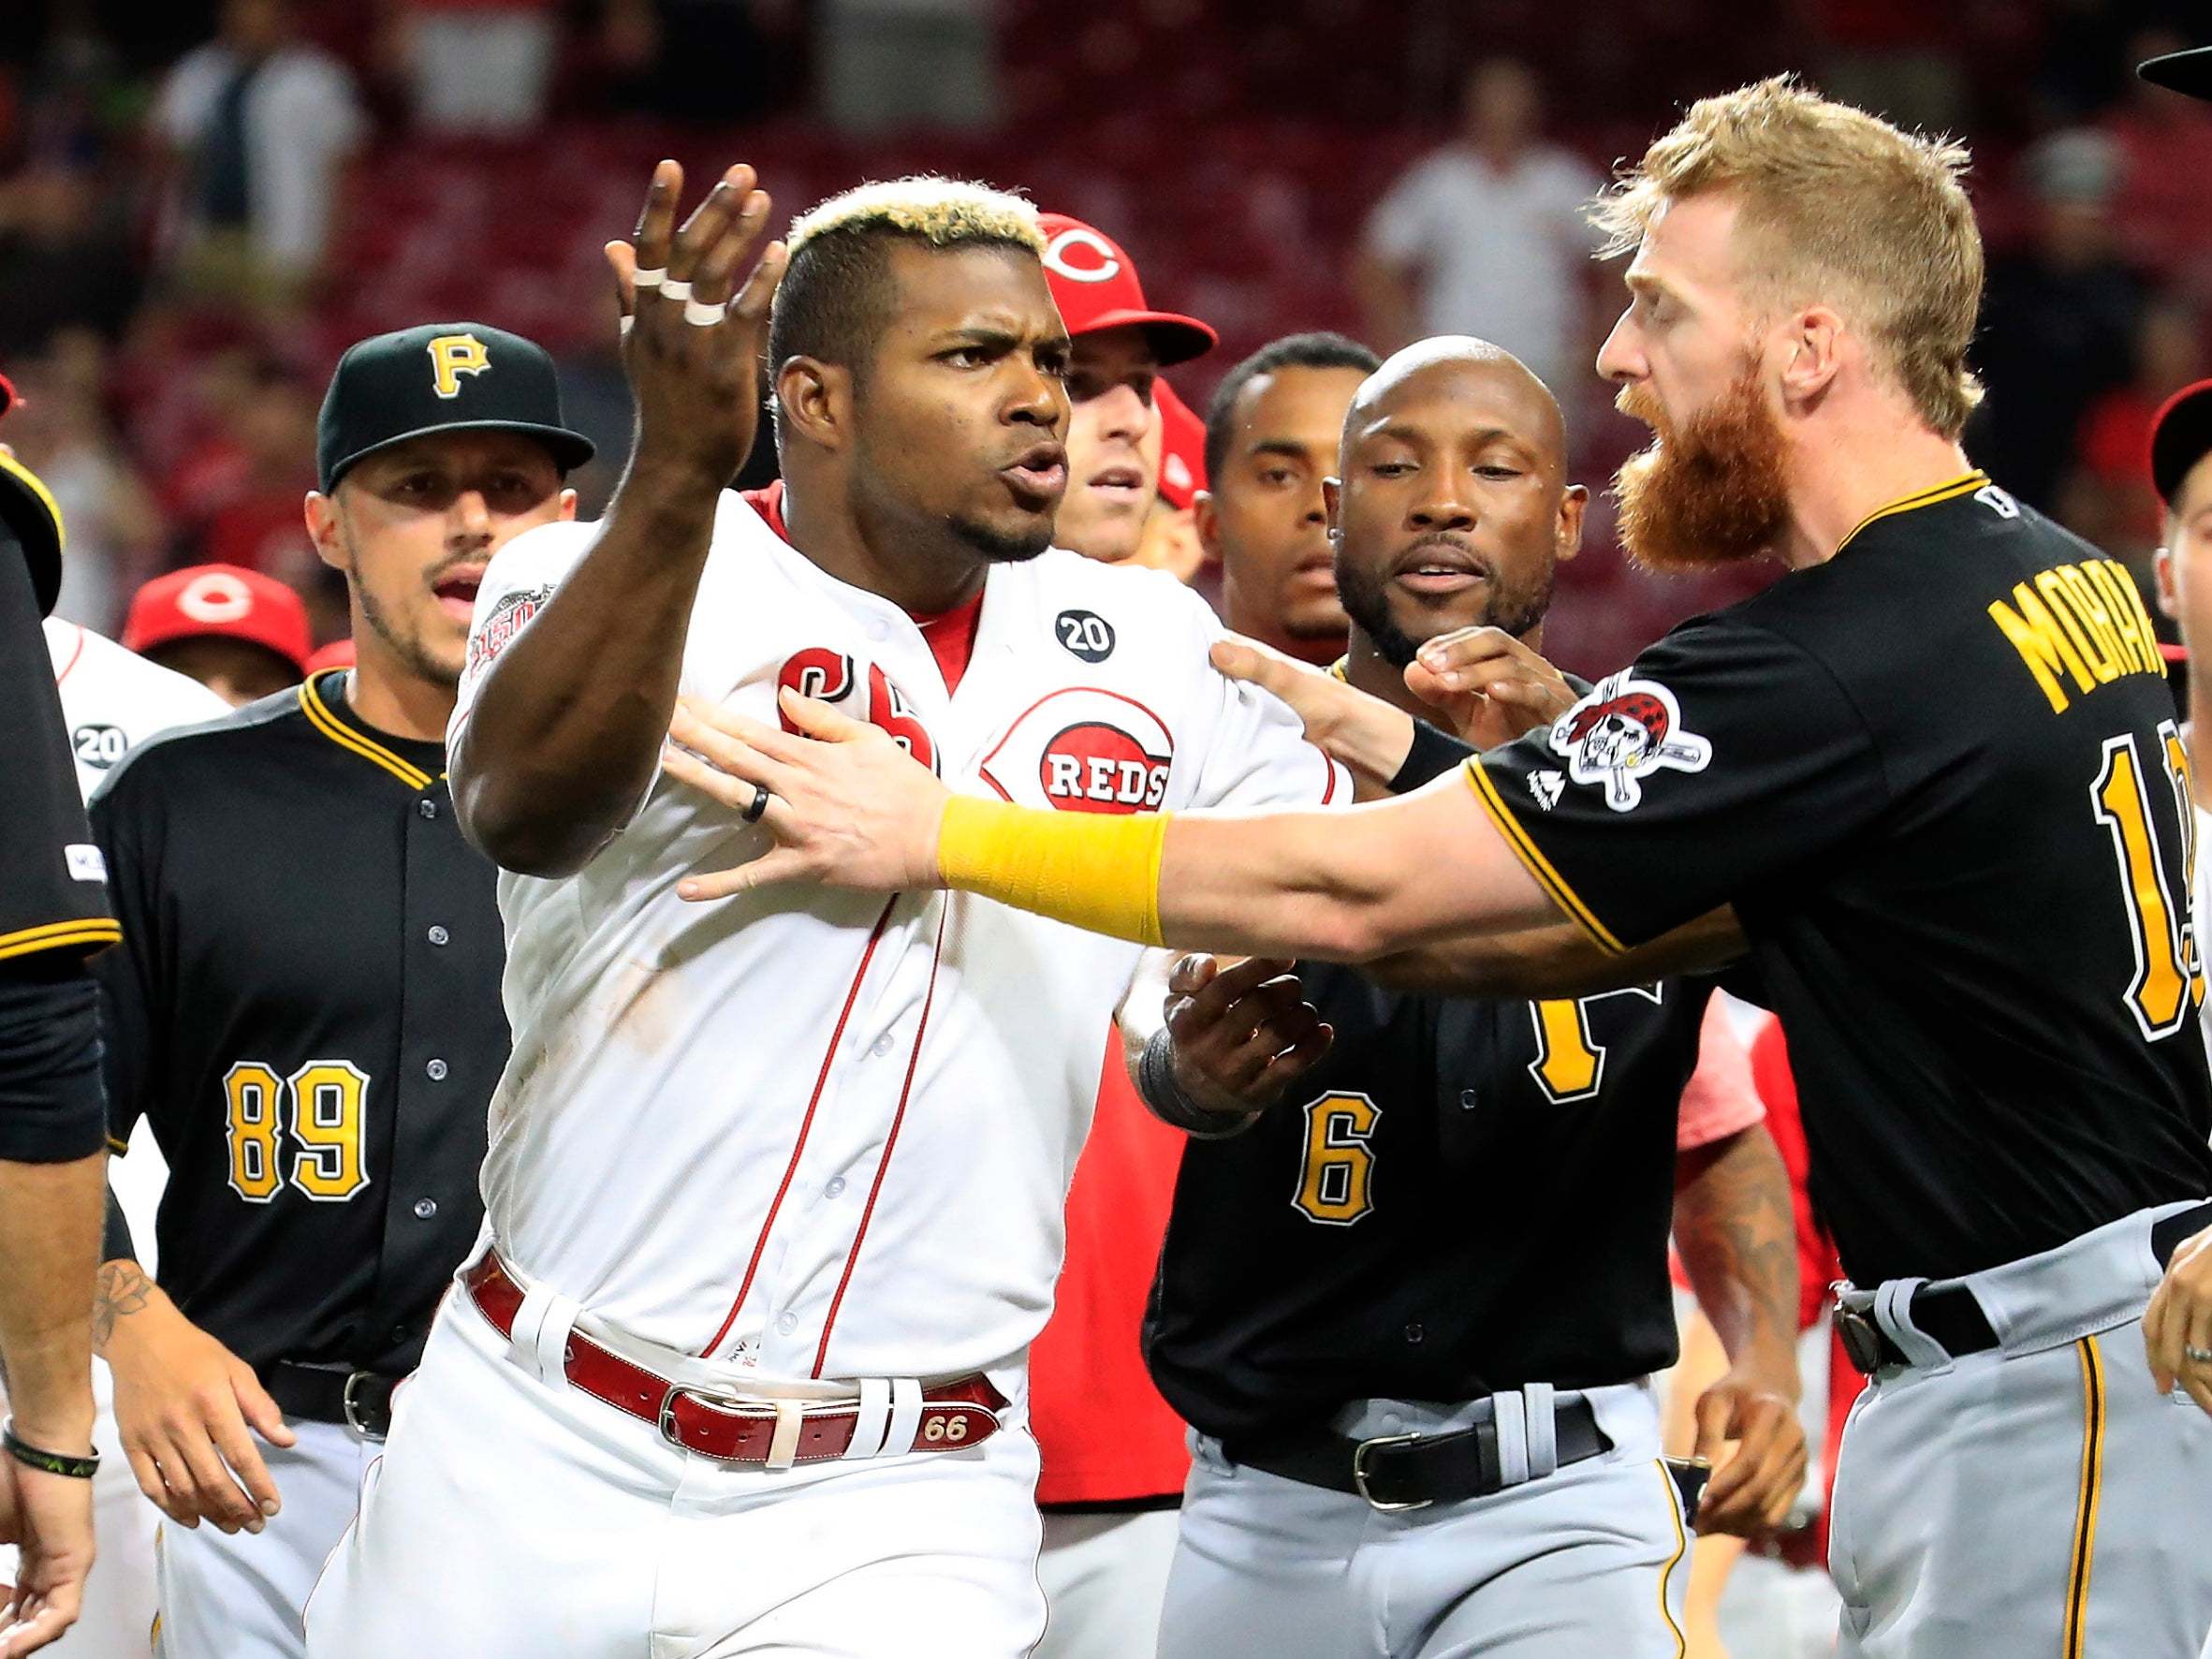 Yasiel Puig ejected in final game for Cincinatti Reds after Amir Garrett sparks five-minute mass brawl